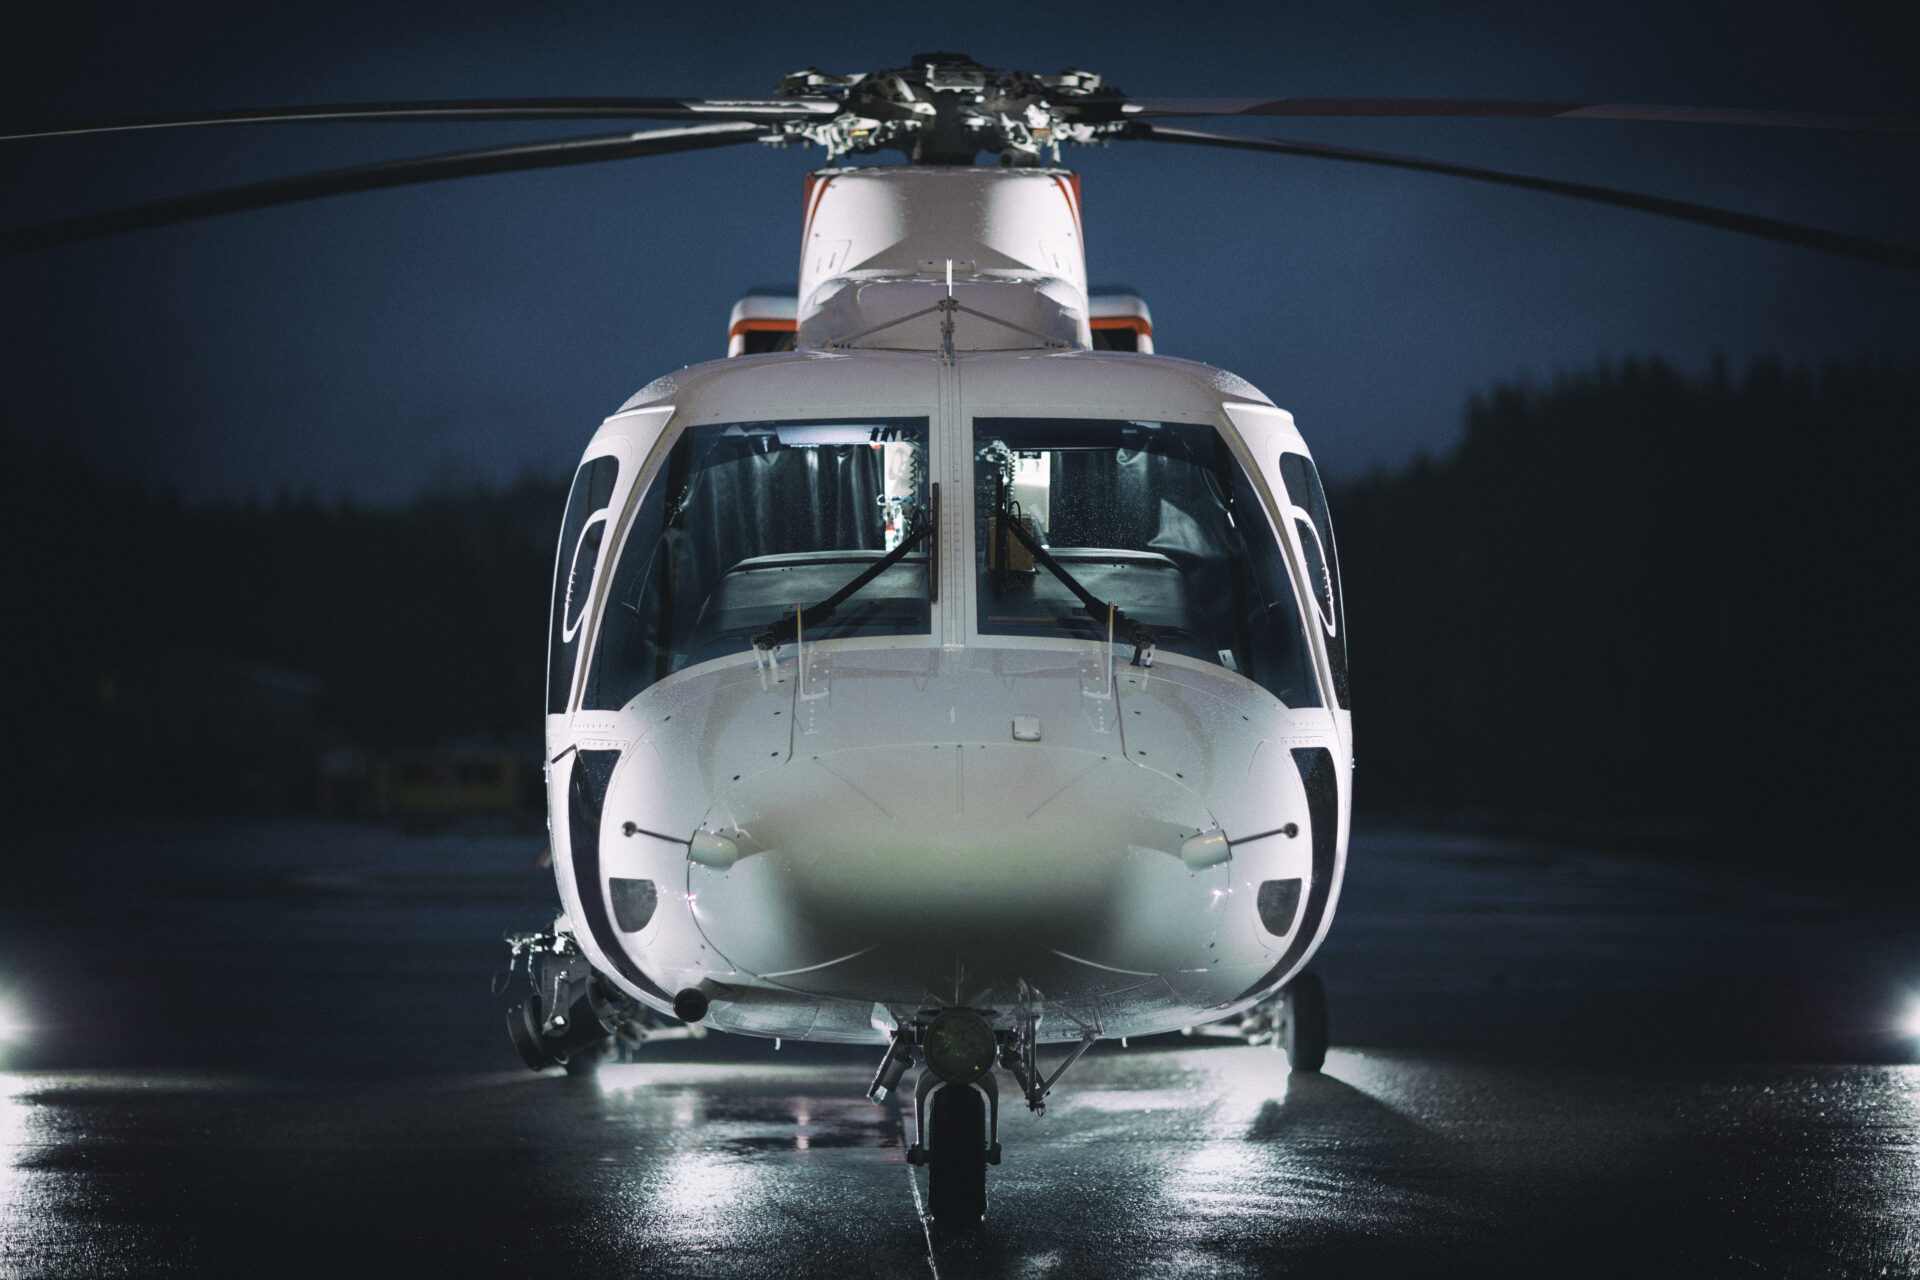 An executive helicopter with dramatic lighting.